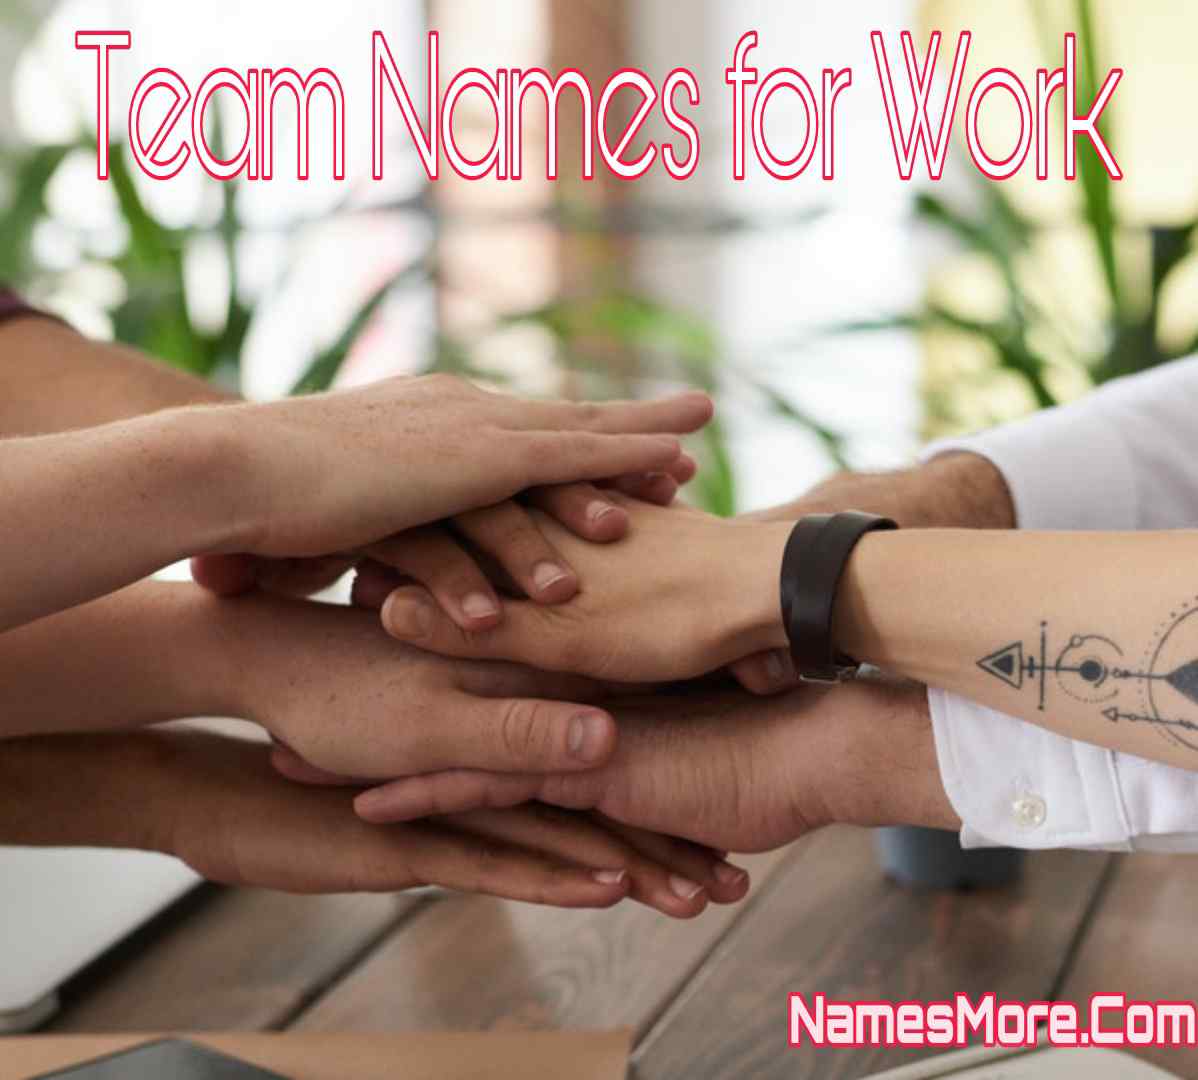 Featured Image for Team Names For Work [960+ Best, Catchy, Funny, Creative & Cool]